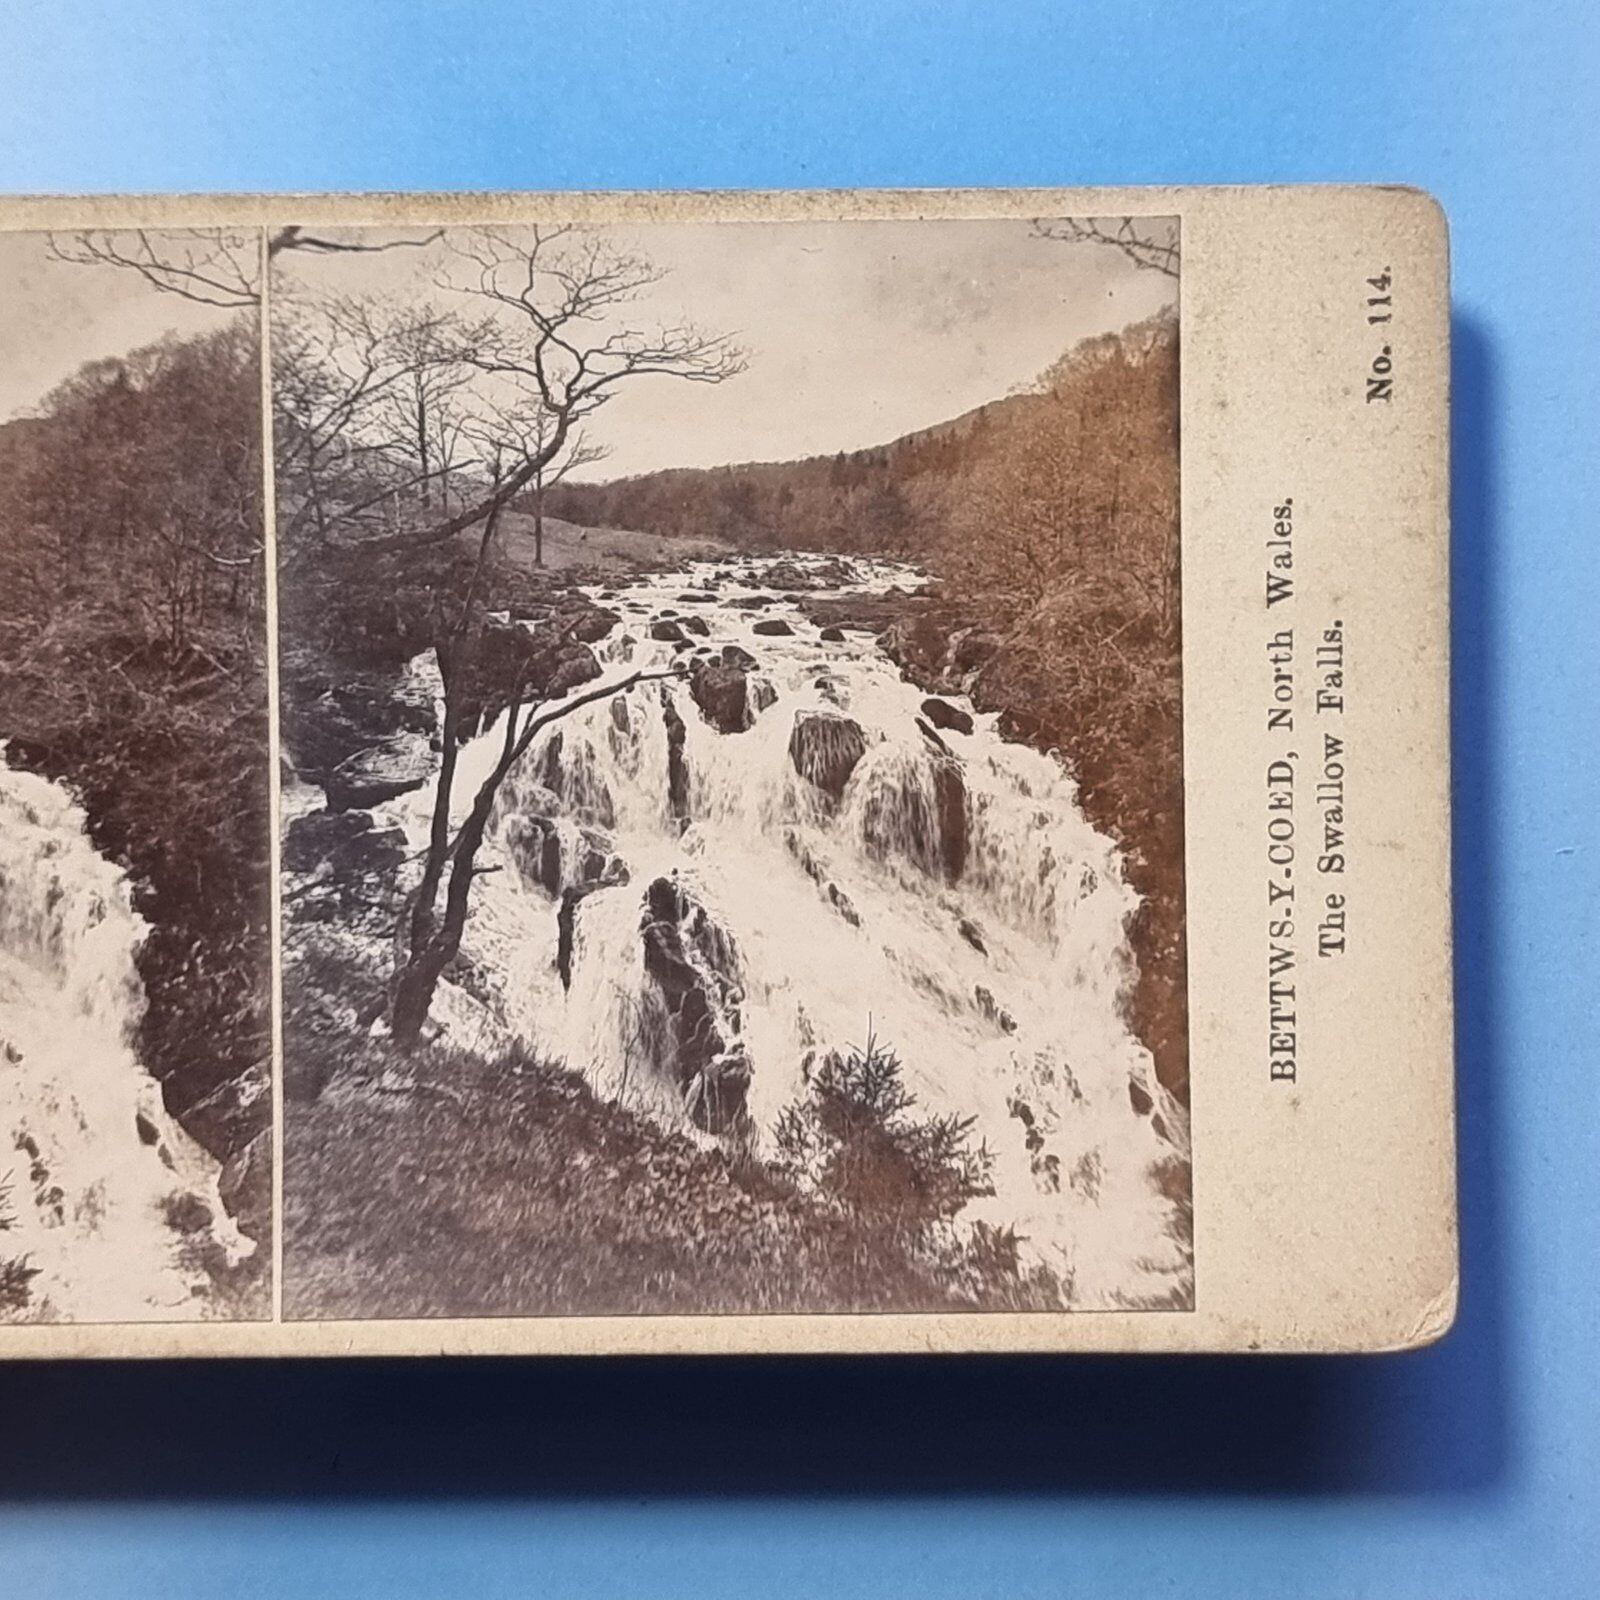 Conway StereoView 3D C1895 The Castle Suspension Bridge By Spencer Wales